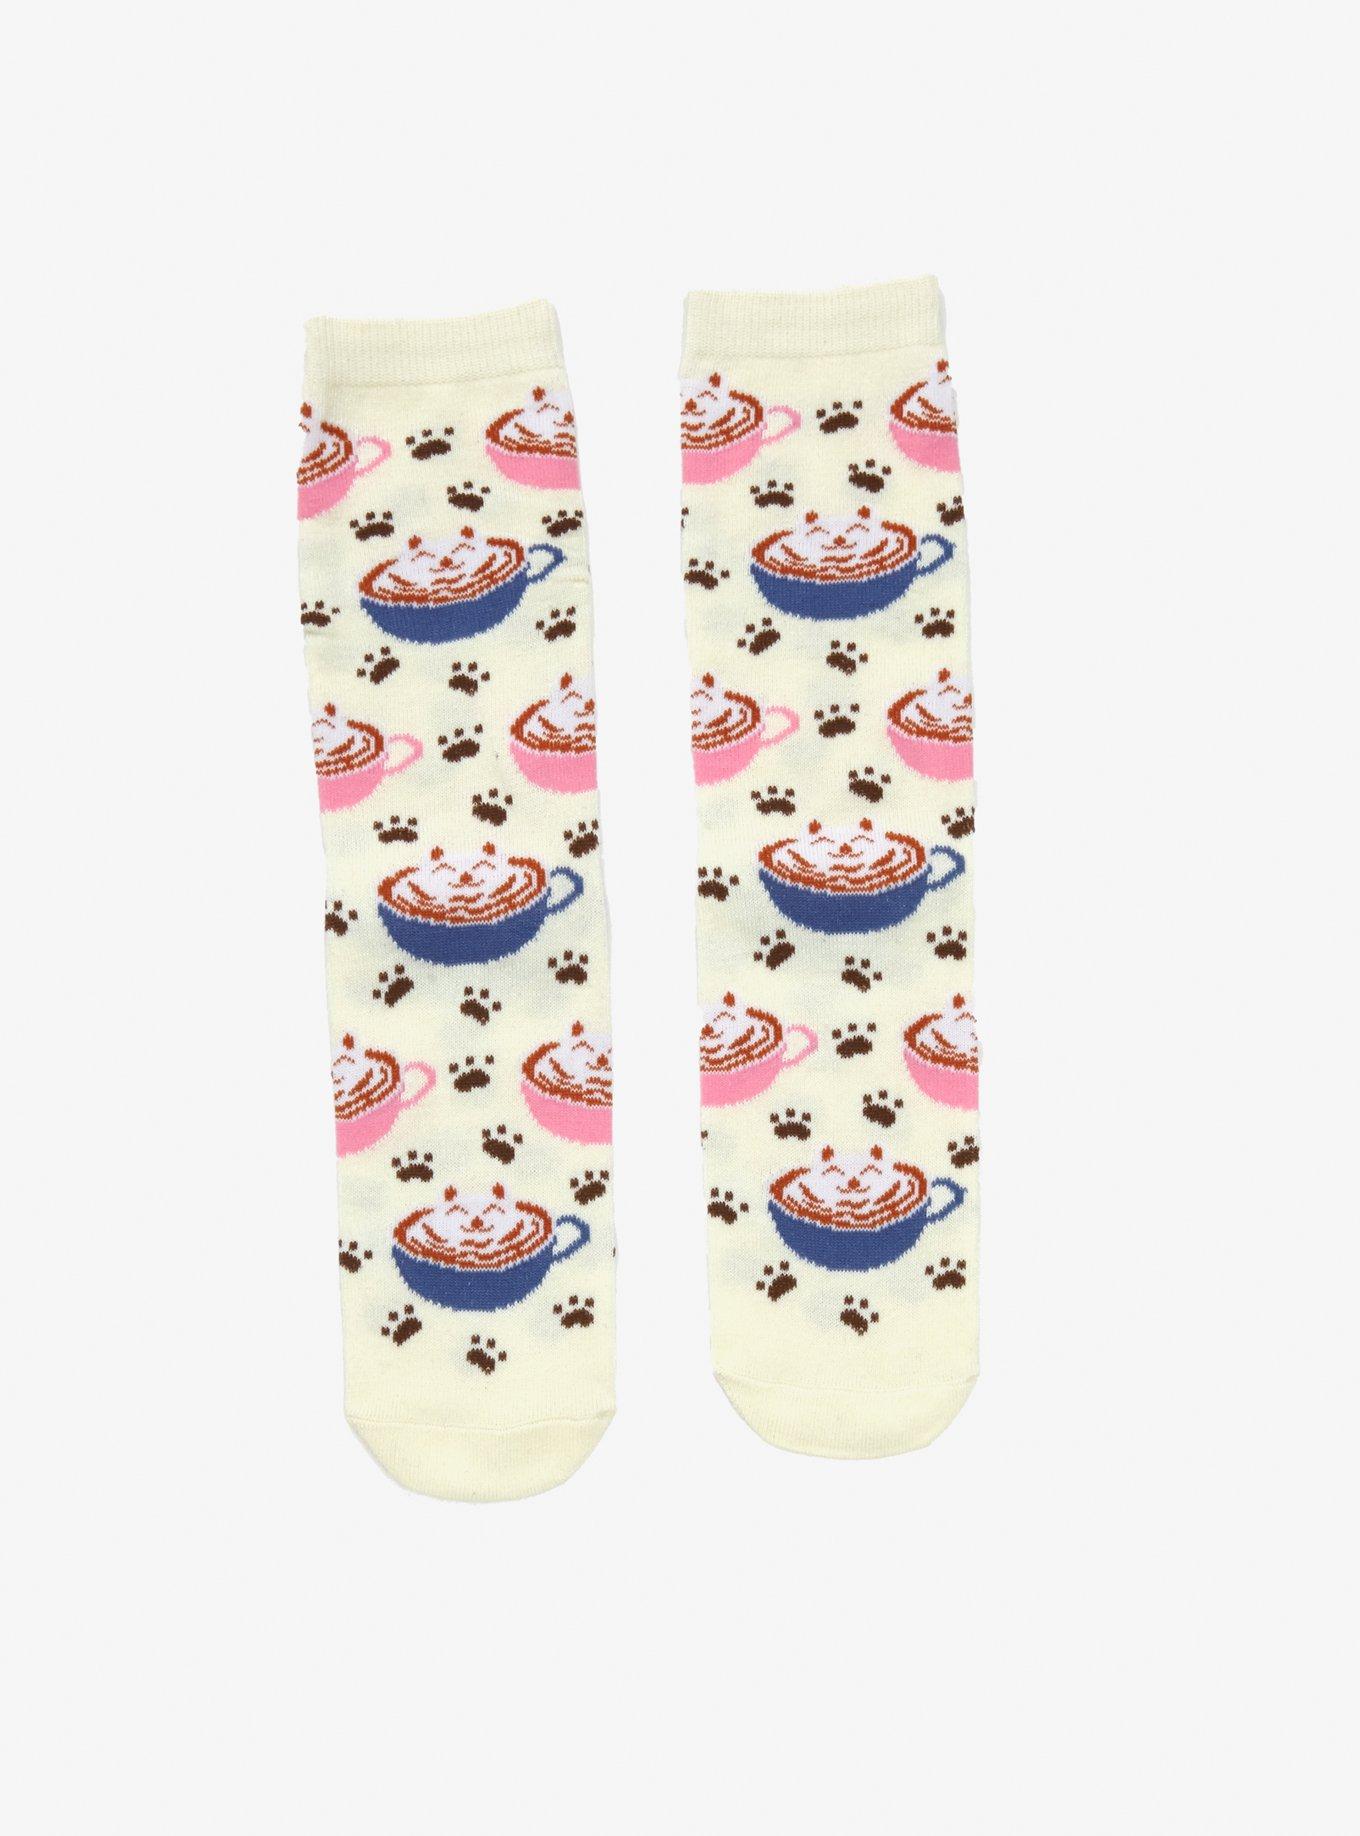 Catpuccino Crew Socks - BoxLunch Exclusive | BoxLunch